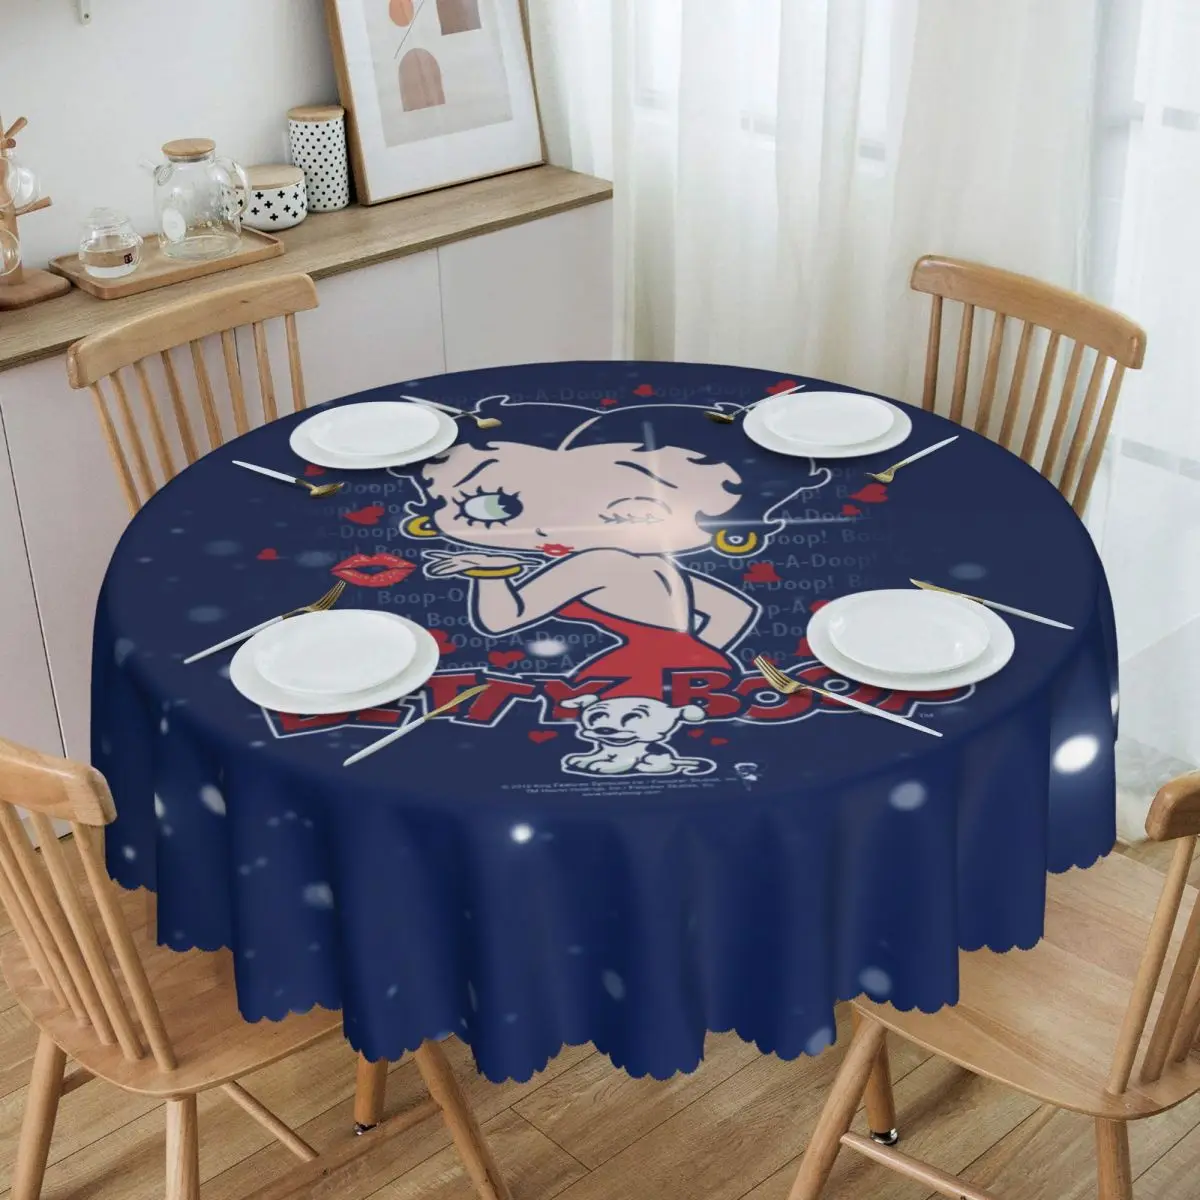 

Round Oilproof Cartoon Girl Boop Bettys Kiss Table Cover Tablecloth for Picnic 60 inches Table Cloth